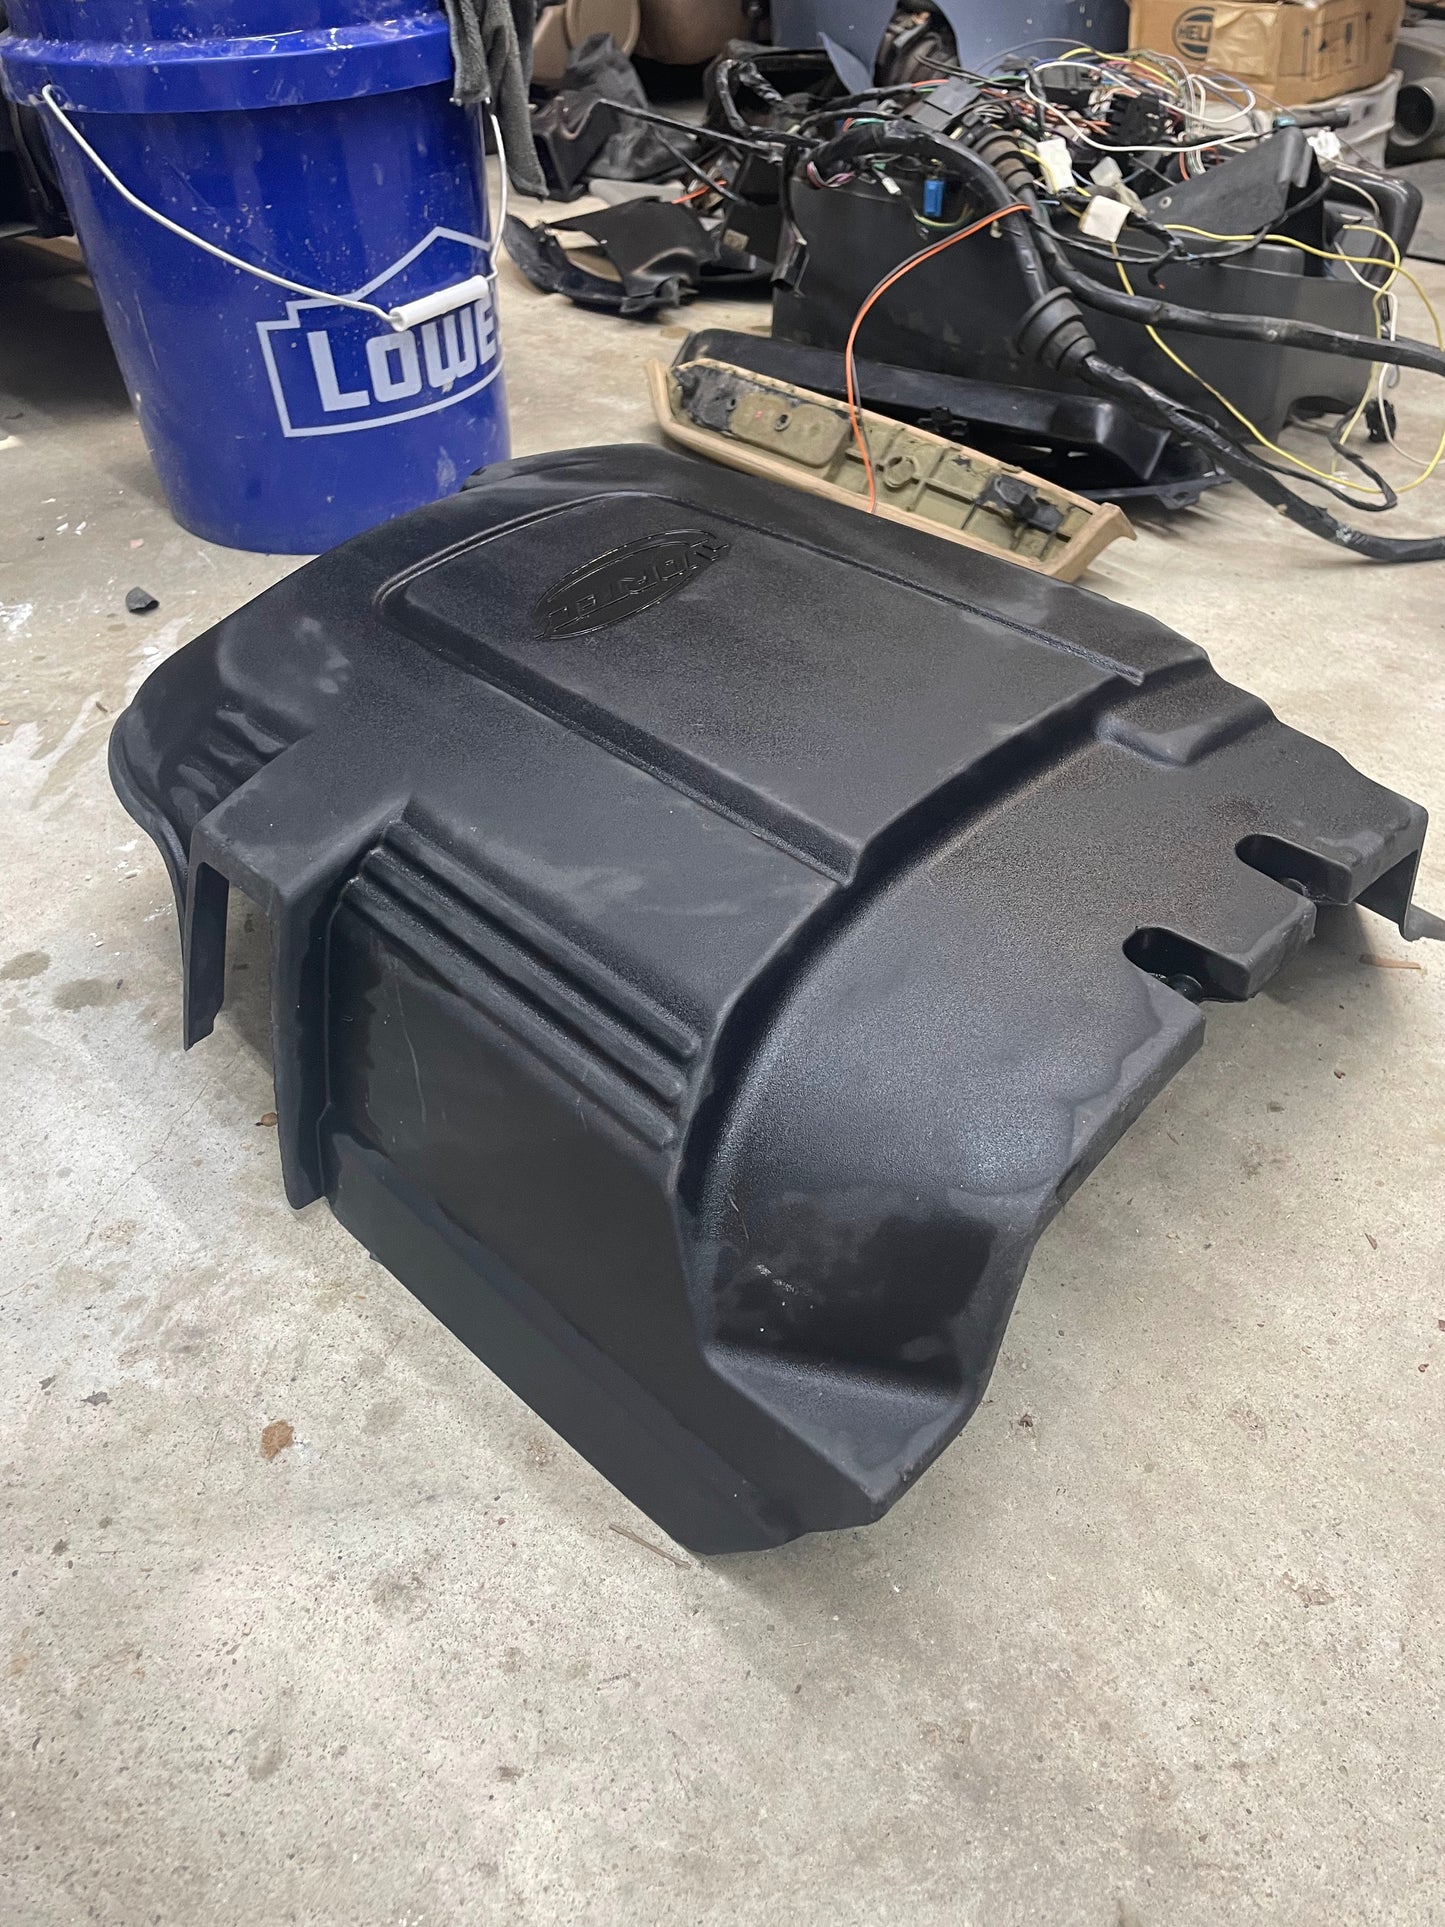 OEM Vortec Engine Intake Cover for 2007-2019 GM Trucks and LS Swaps